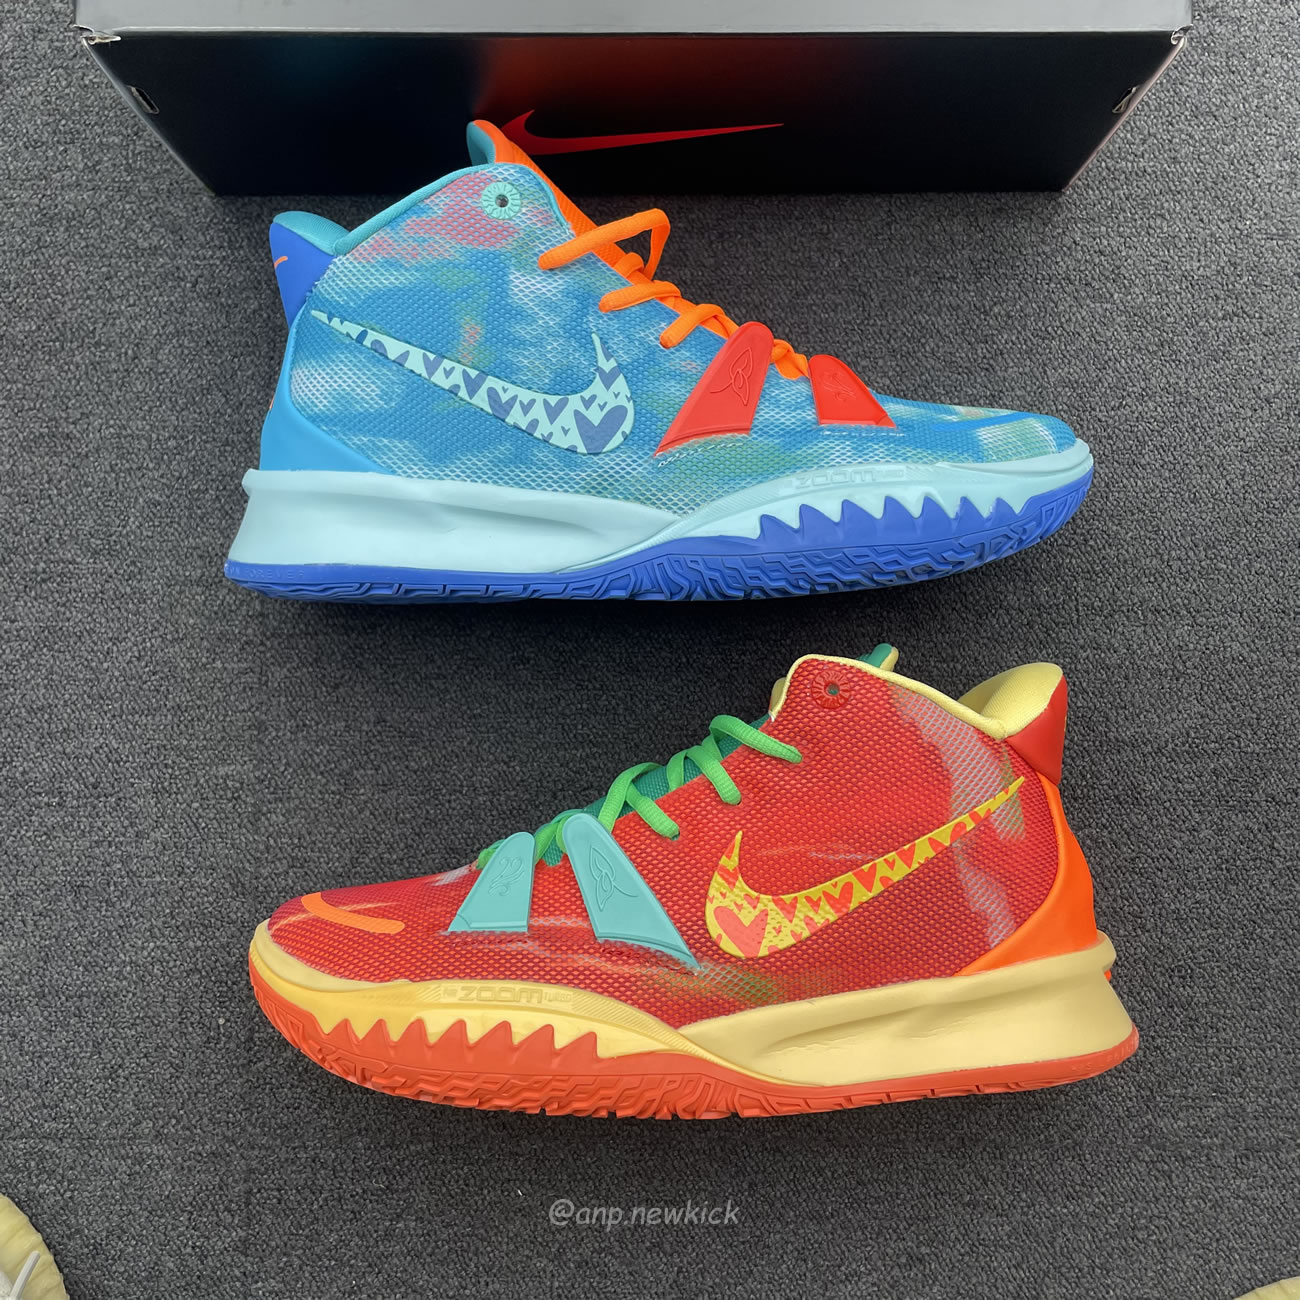 Nike Kyrie 7 Sneaker Room Fire And Water Do5360 900 (16) - newkick.org